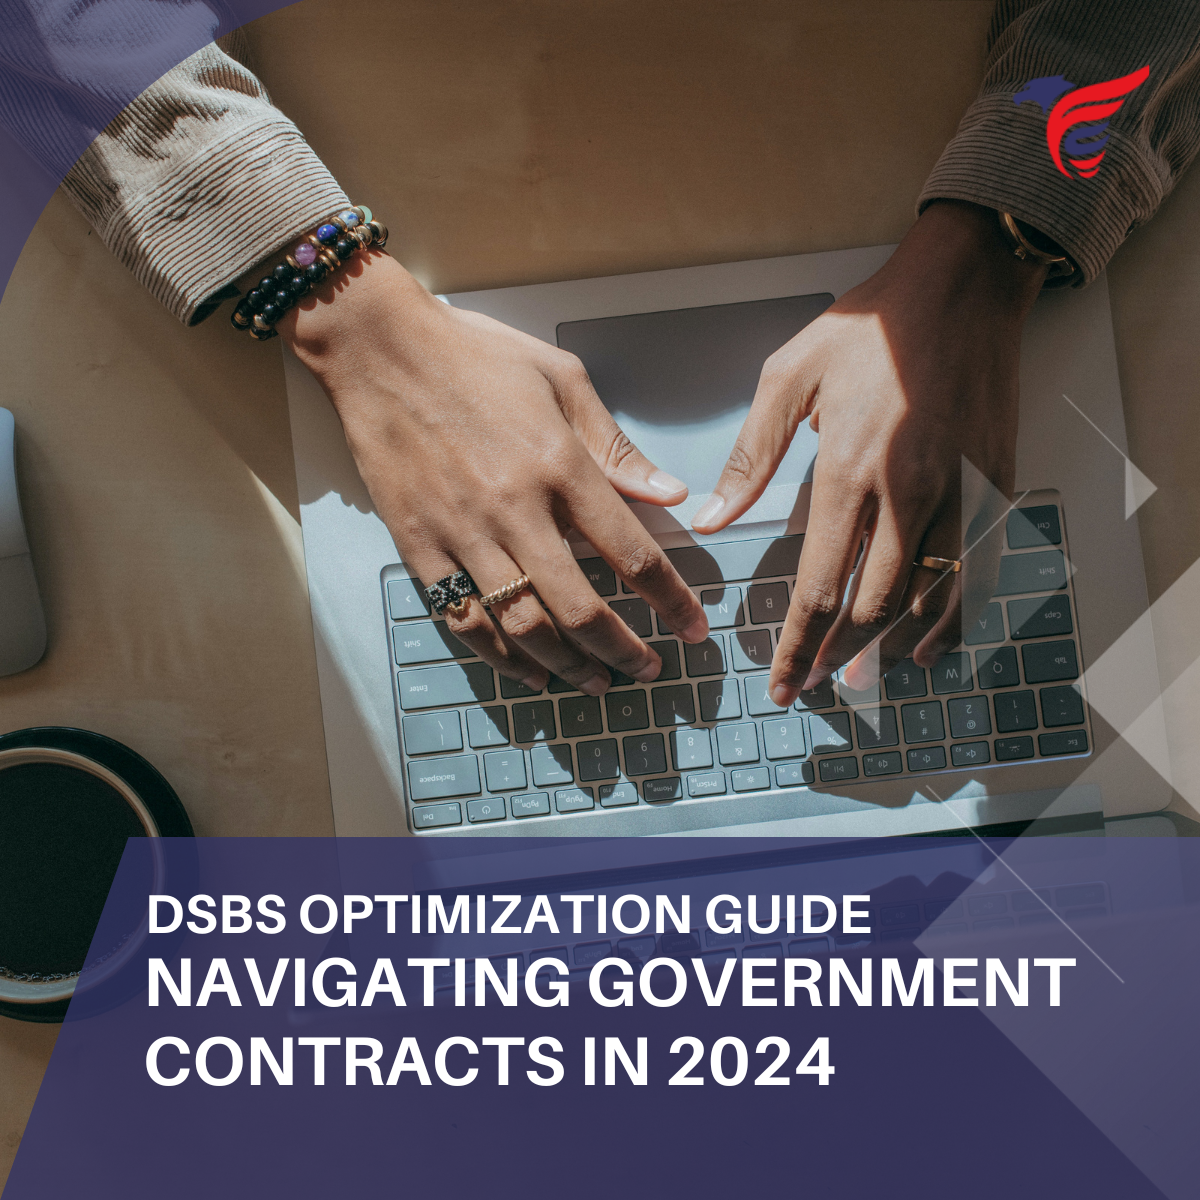 DSBS Optimization Guide: Navigating Government Contracts in 2024